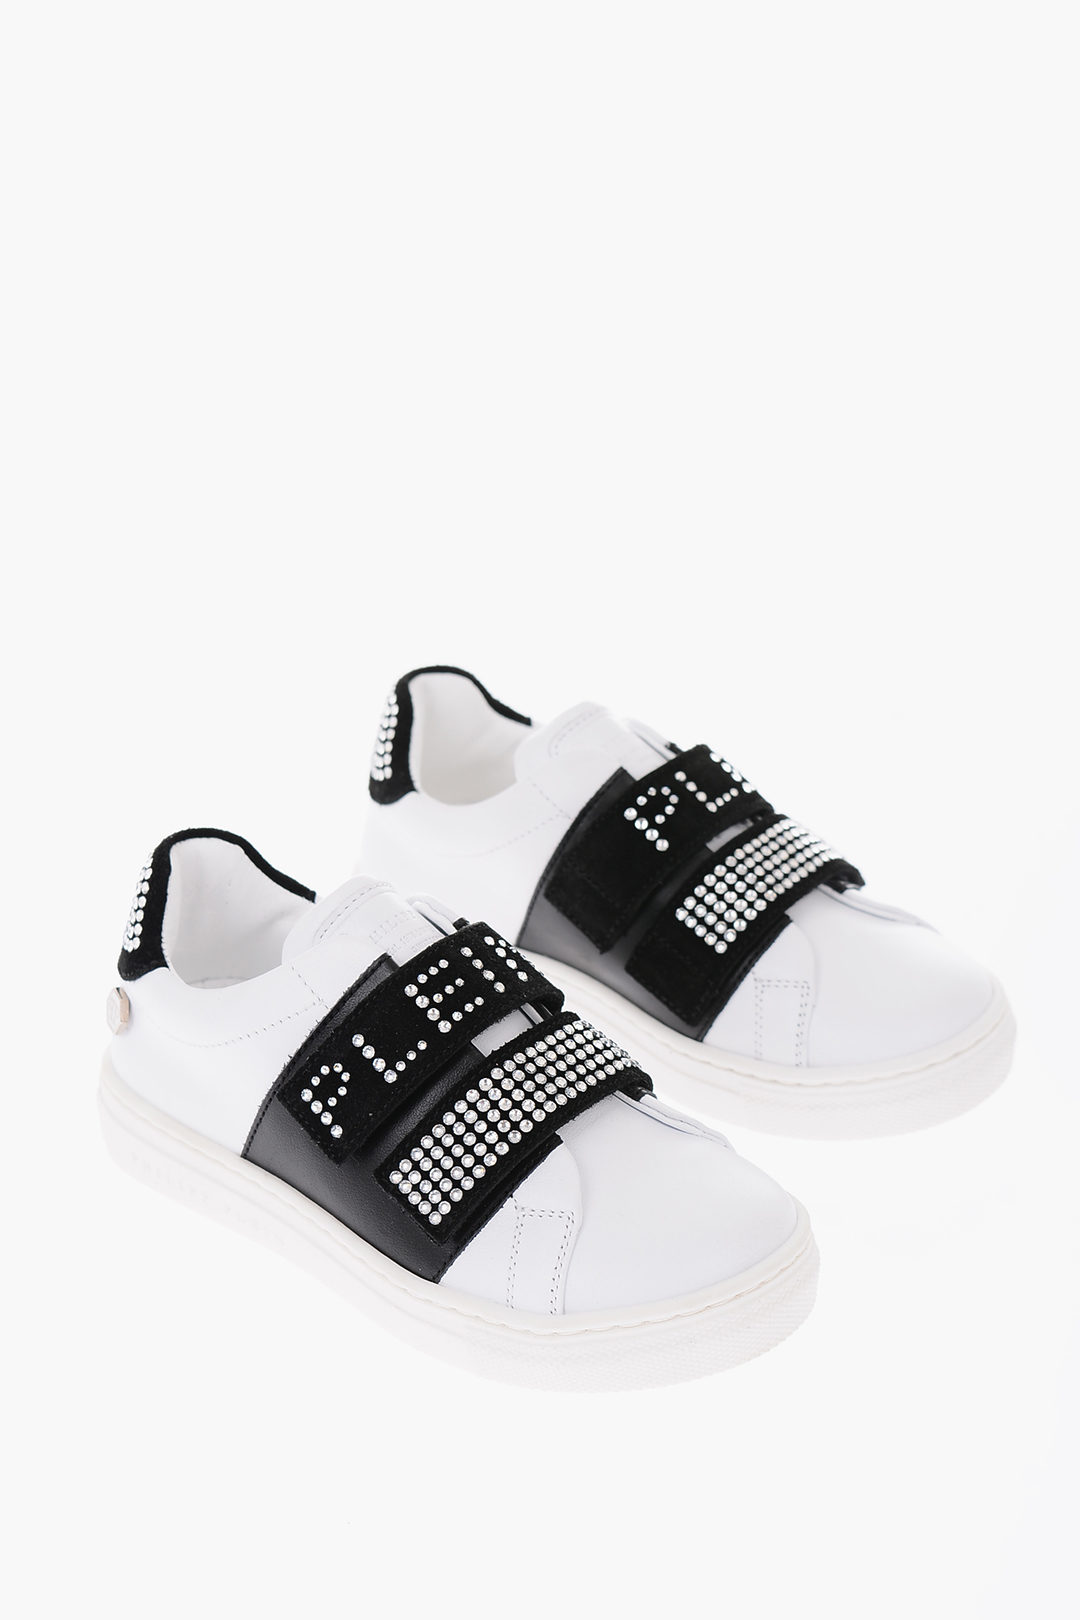 Philipp Plein leather sneakers with touch strap closure girls - Glamood ...